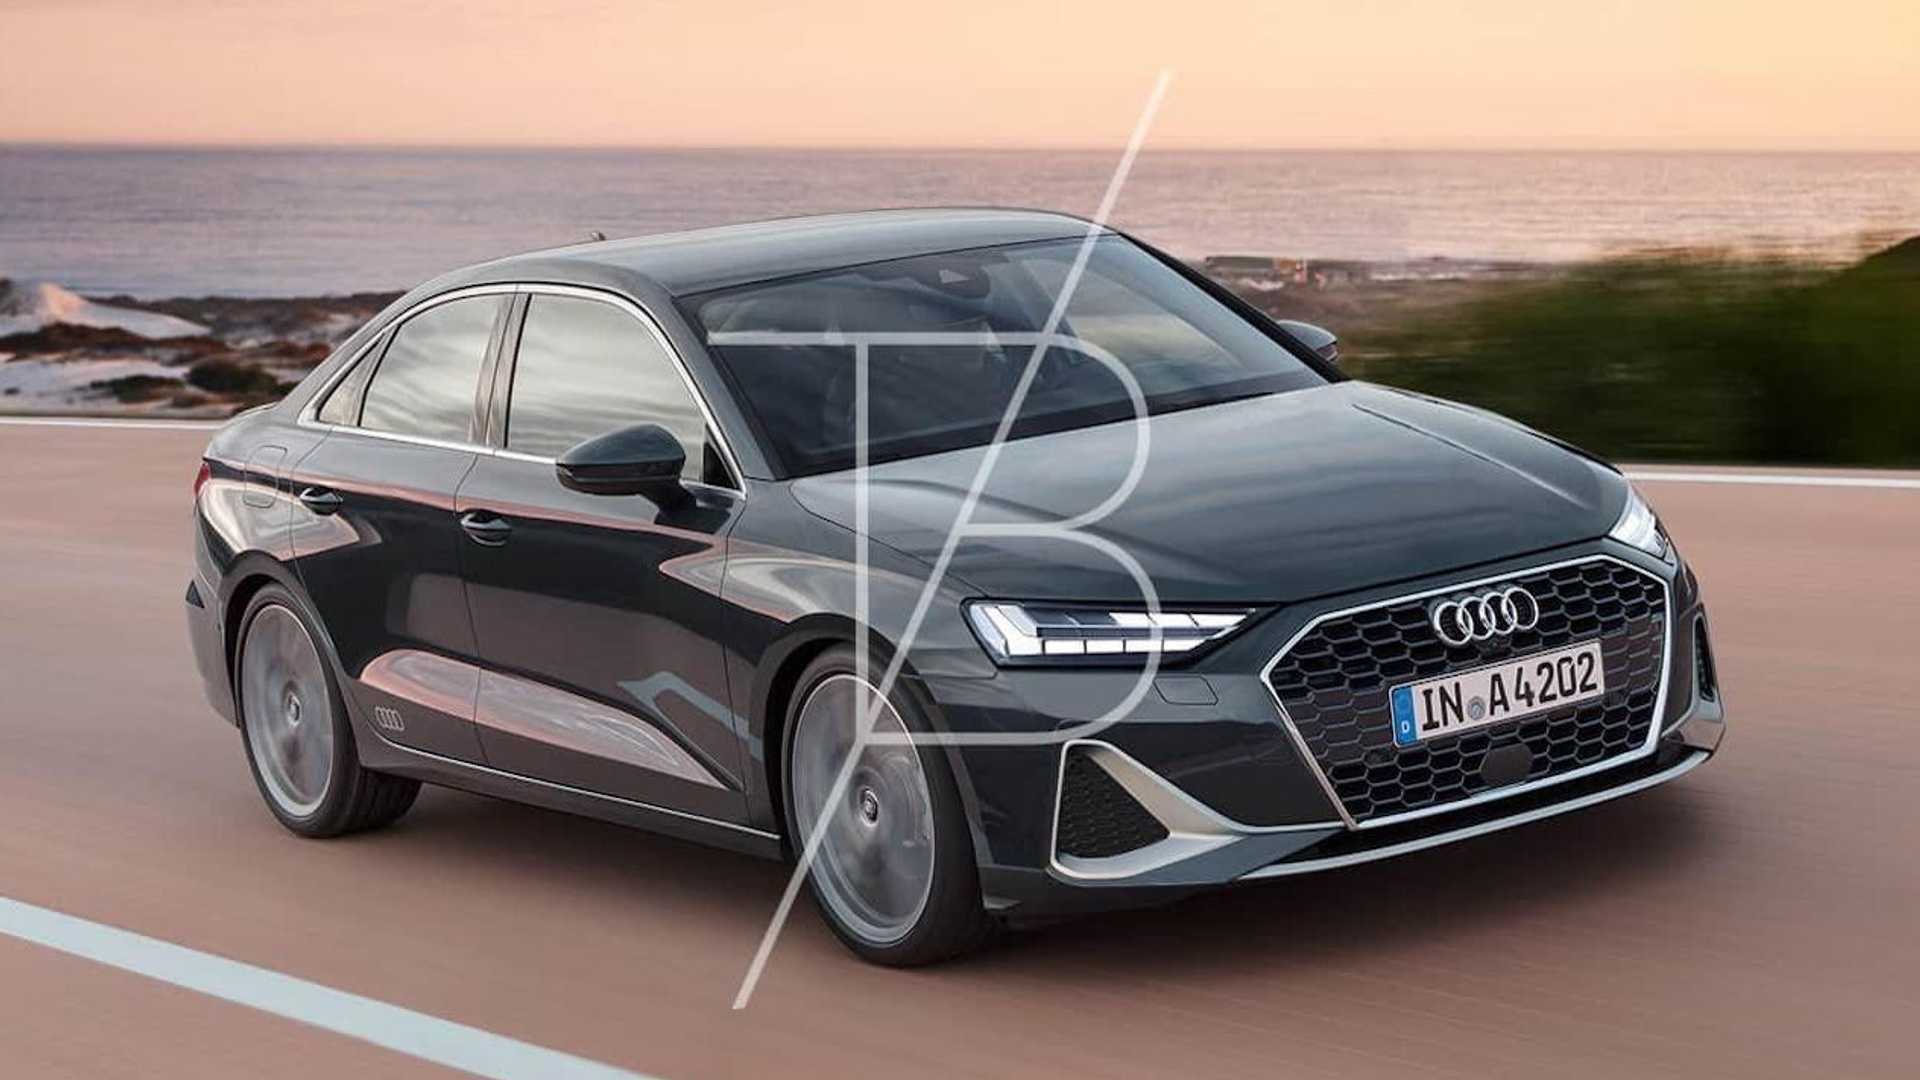 2023 Audi A4 To Be Powered By Next-Generation Gasoline And Diesel Engines